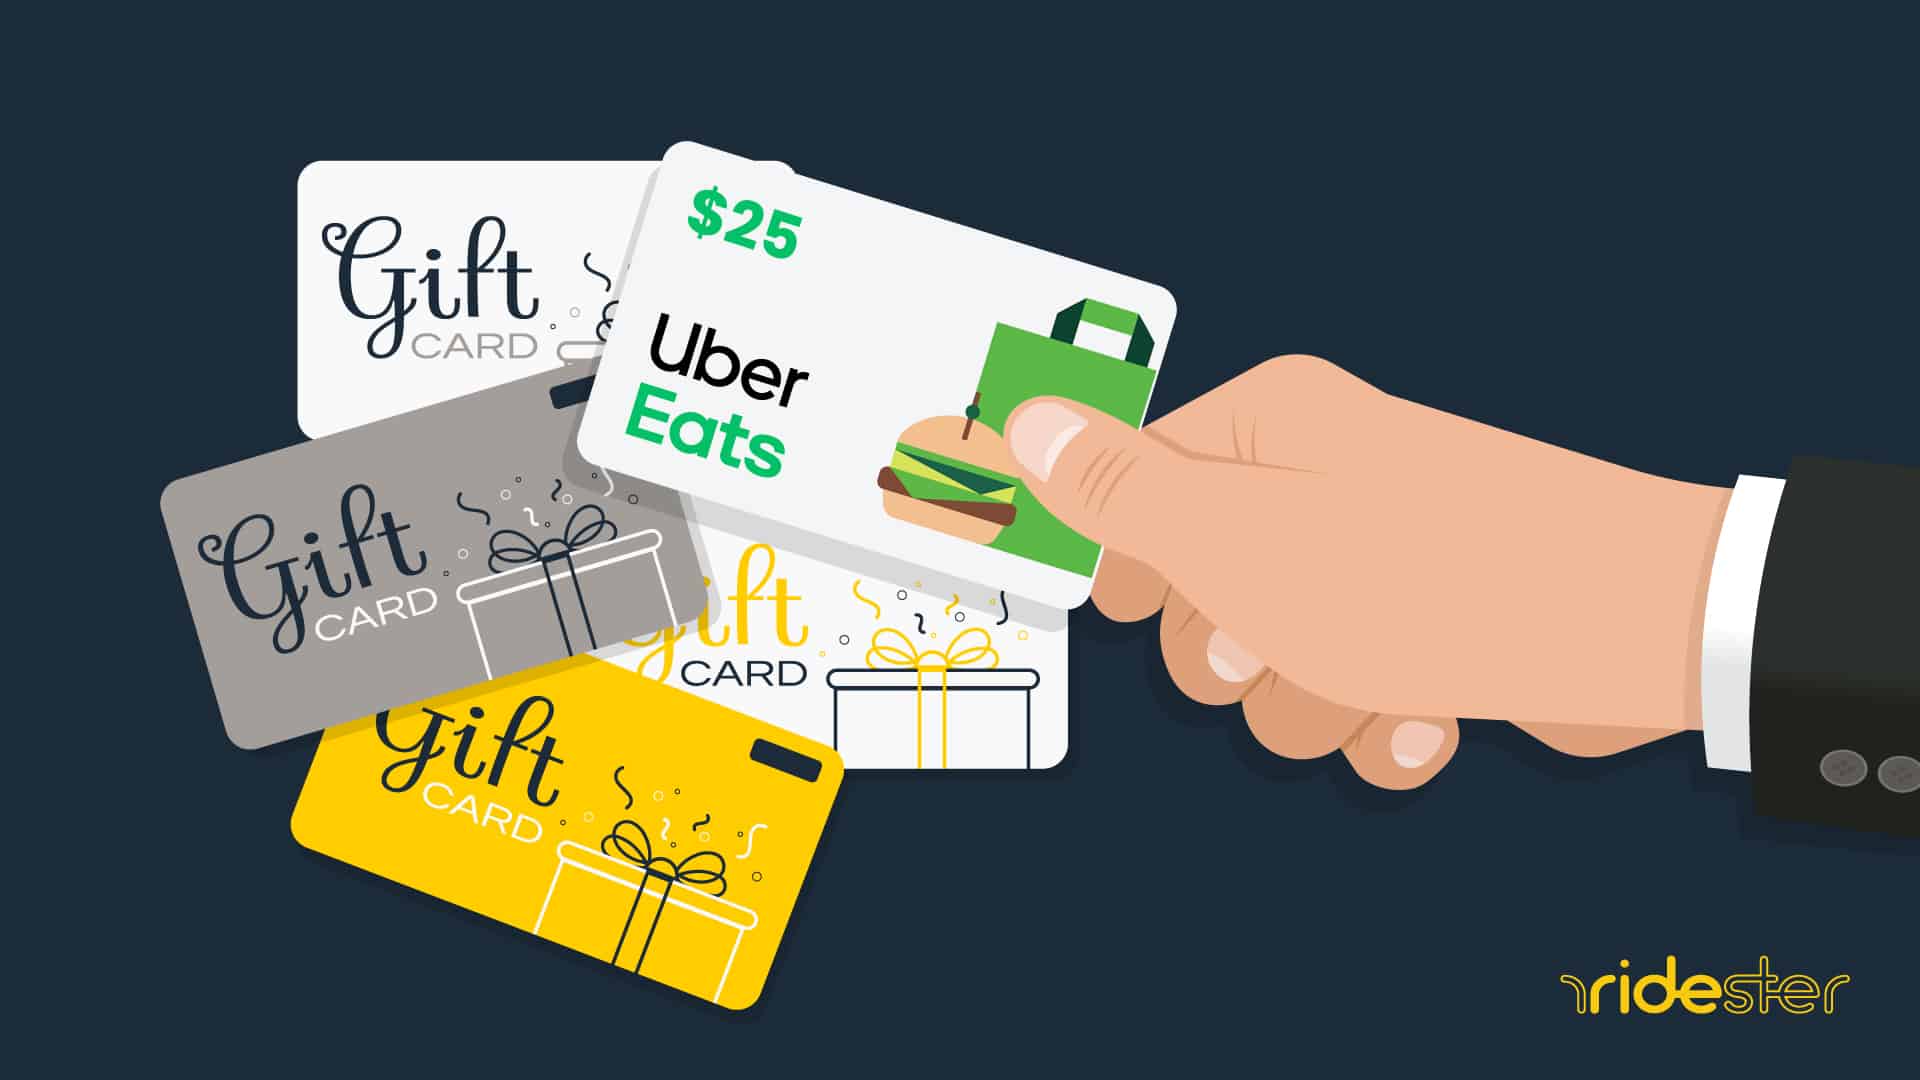 vector graphic showing hand holding an Uber Eats gift card